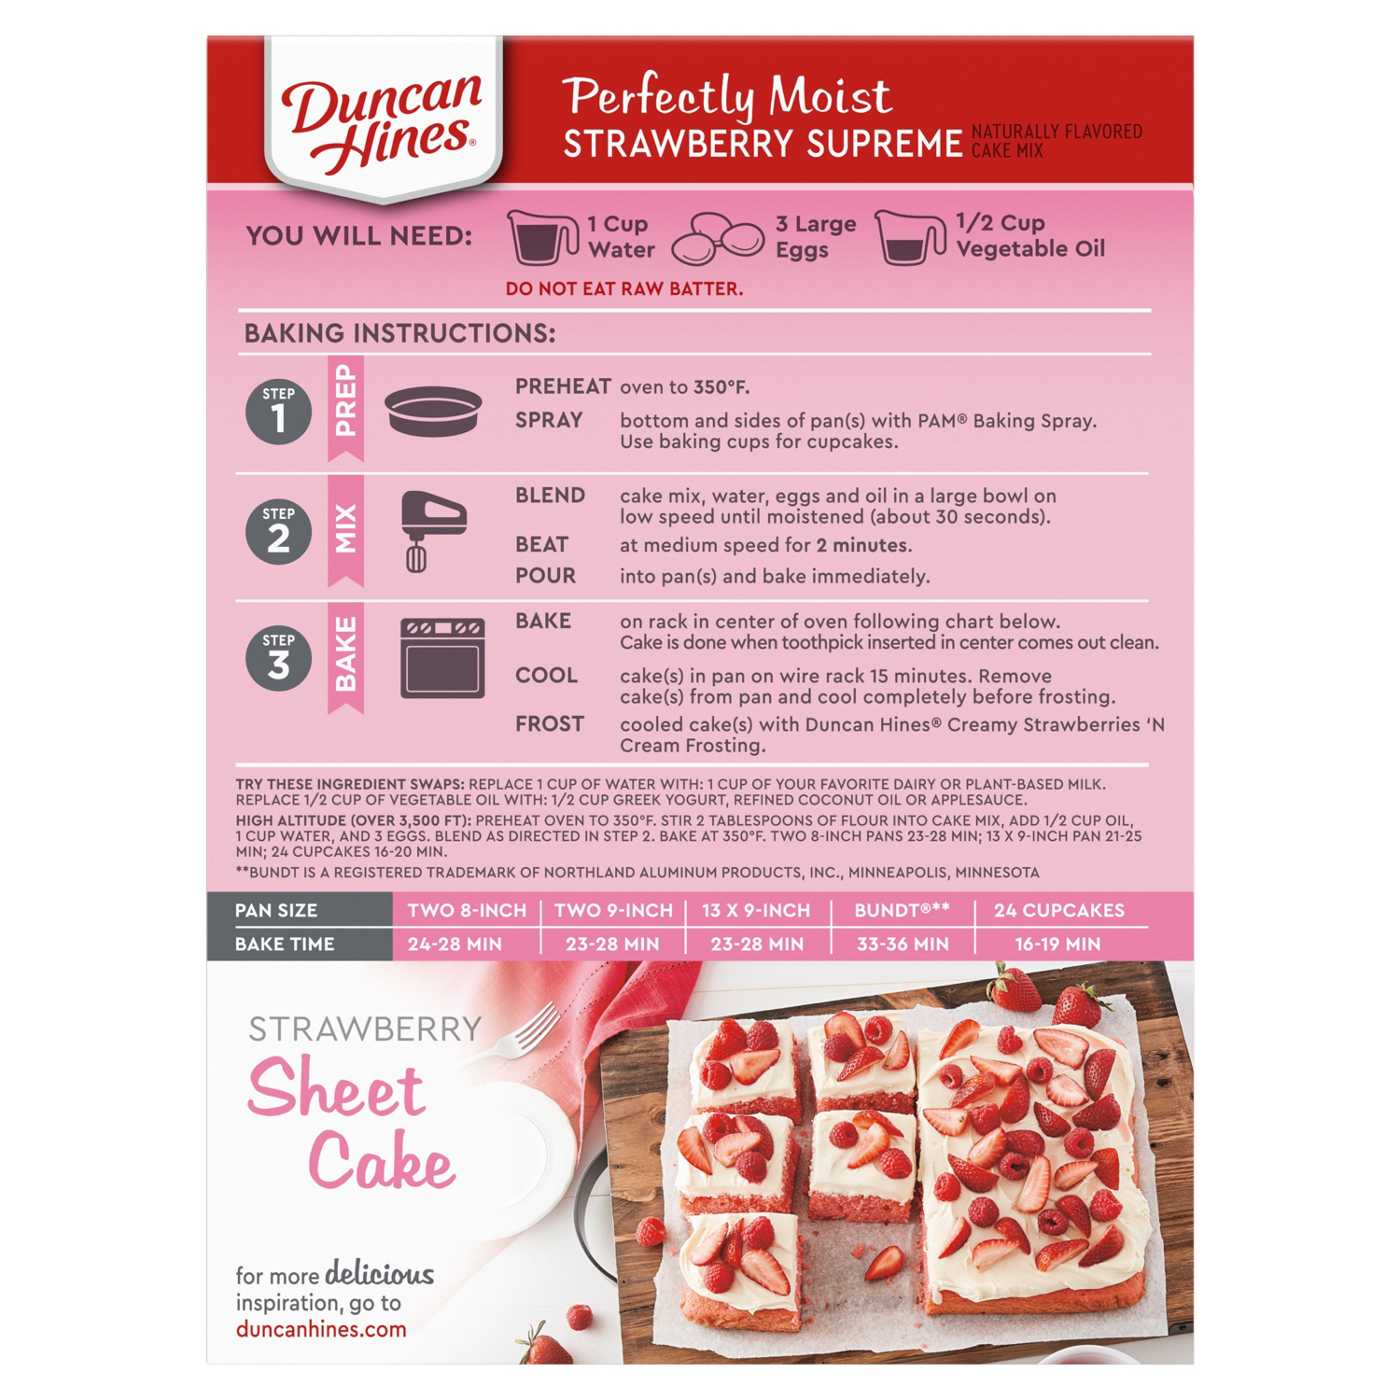 Duncan Hines Signature Perfectly Moist Strawberry Supreme Cake Mix; image 3 of 7